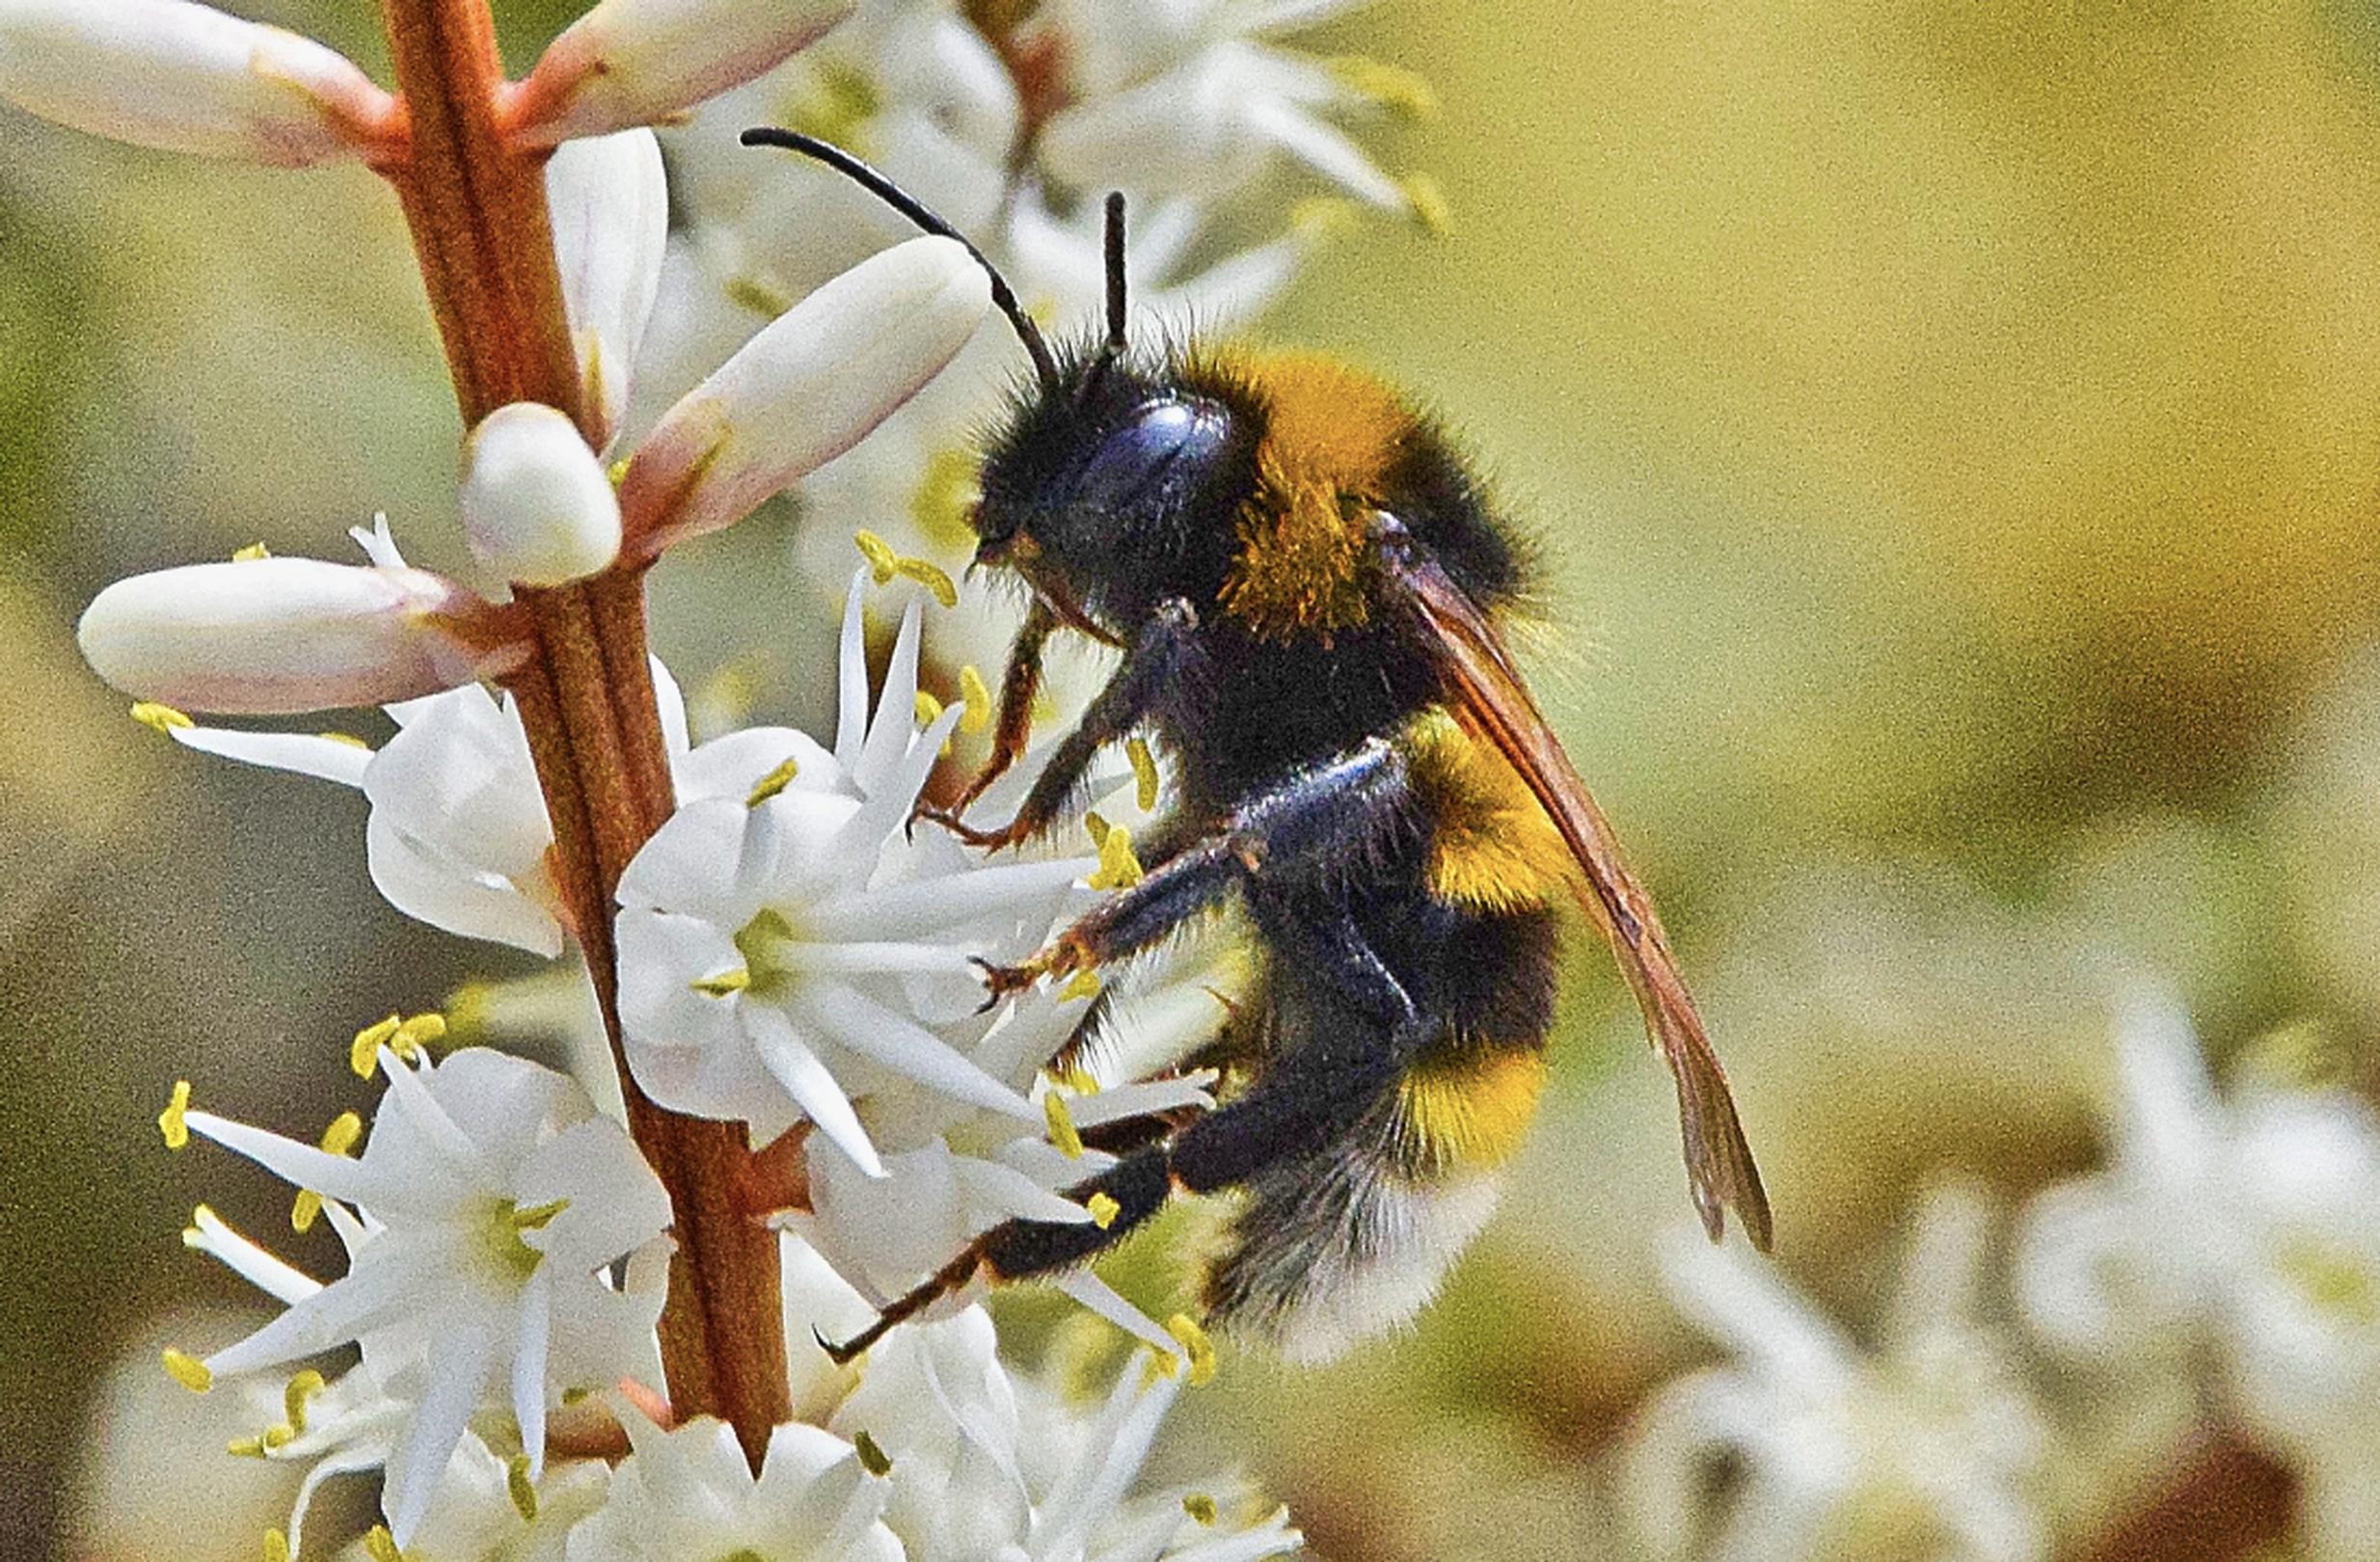 Worcestershire County Council hopes its sedum-roofed bus stop will boost bee numbers (Steve Douglas/Unsplash)